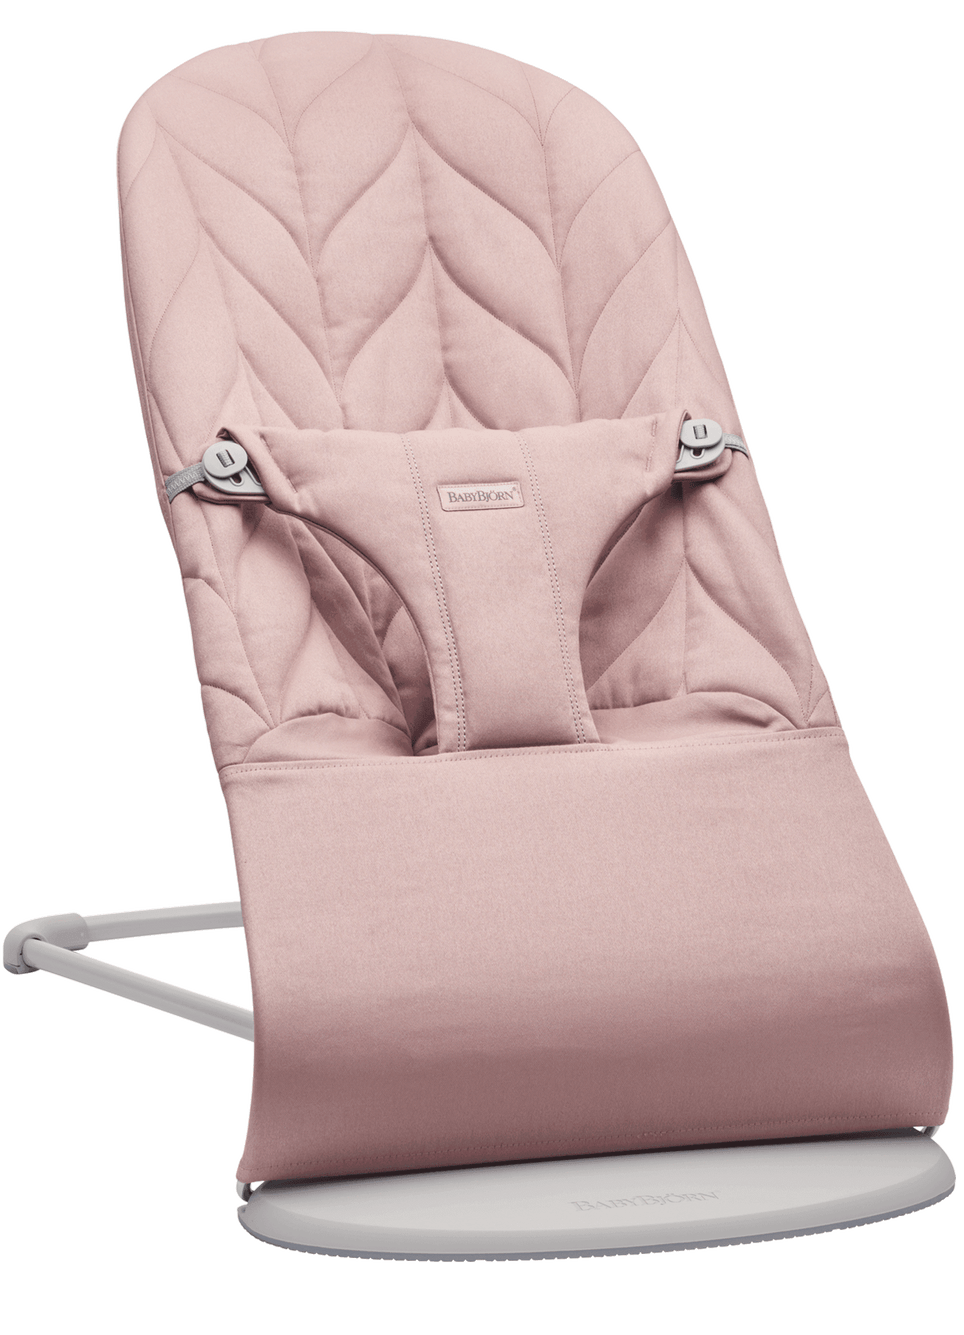 BabyBjorn Bouncer Bliss Cotton - Kiddie Country